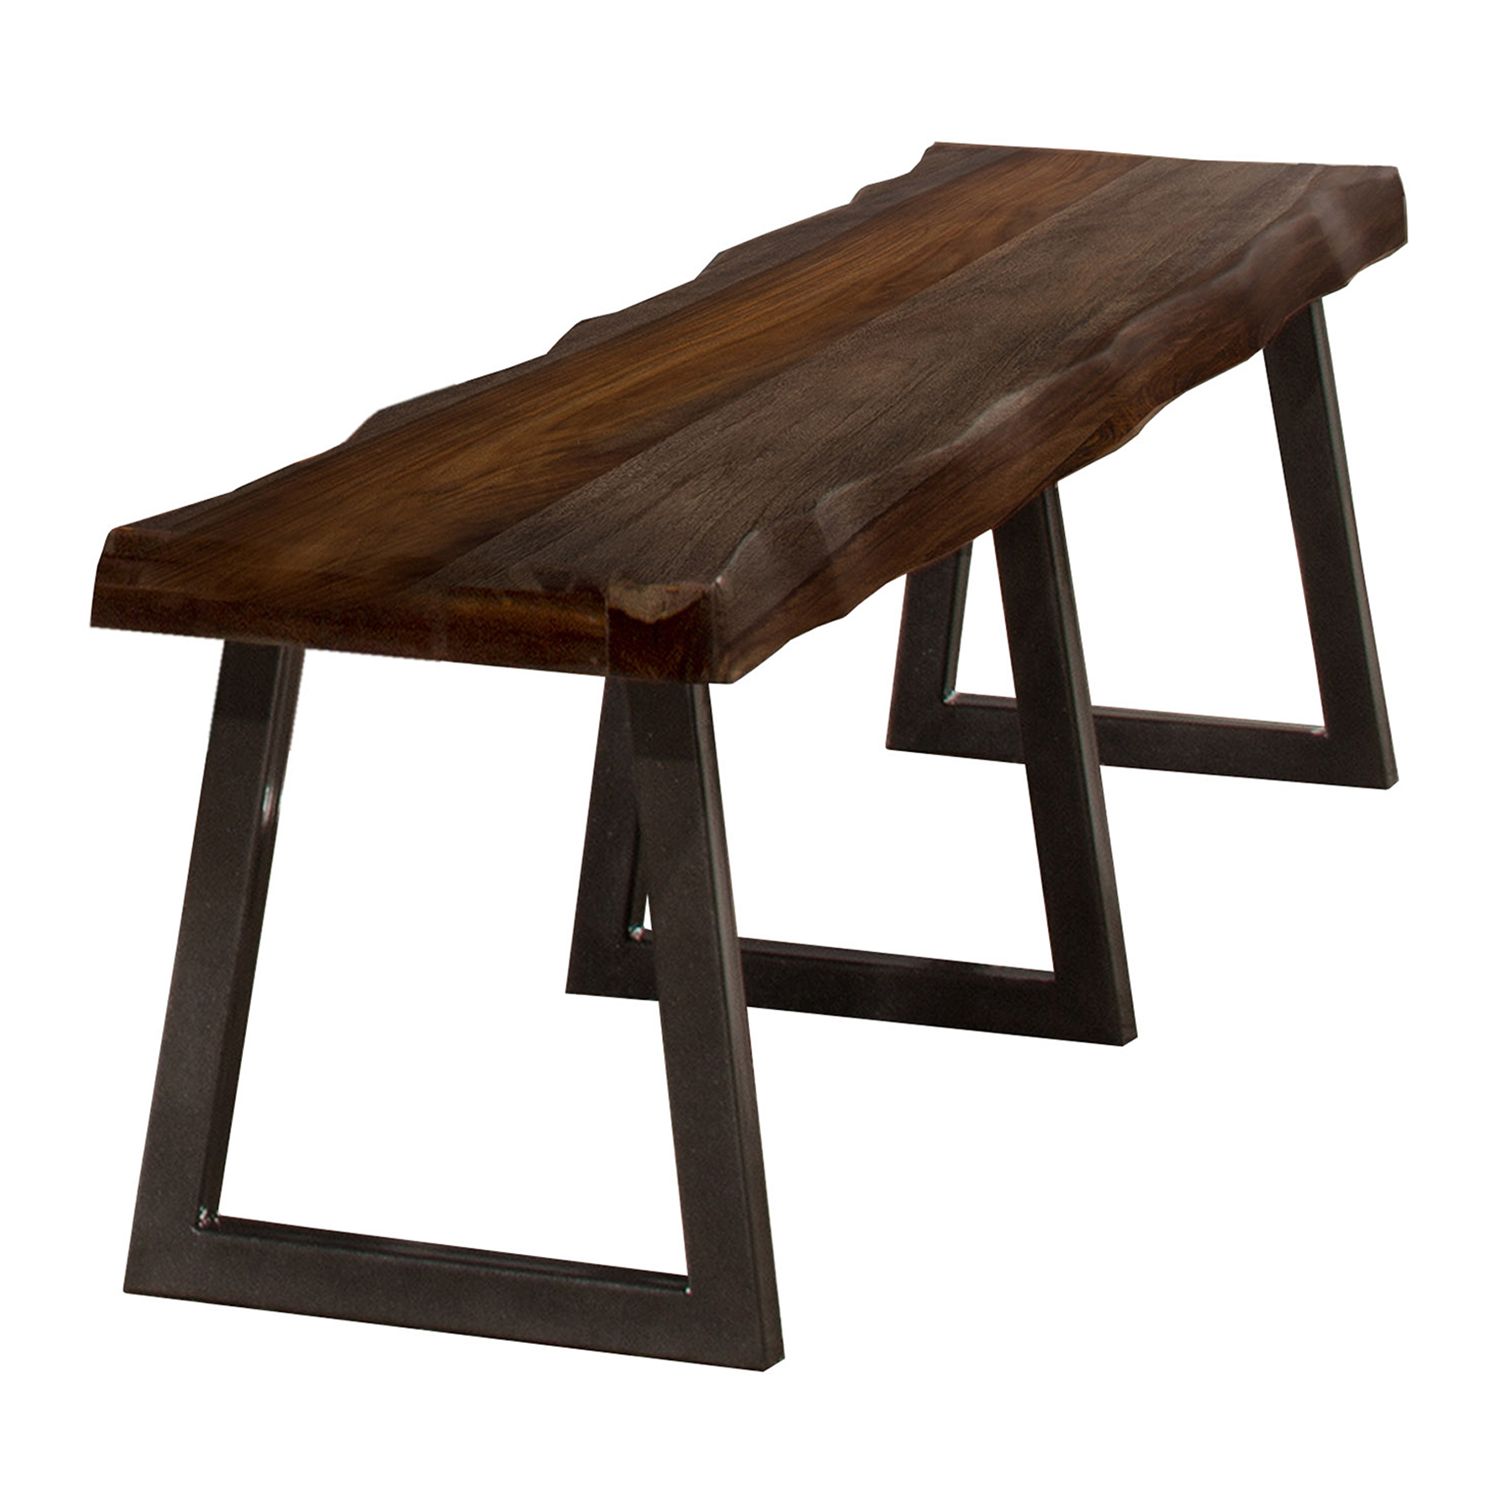 Image for Hillsdale Furniture Emerson Metal & Wood Bench at Kohl's.